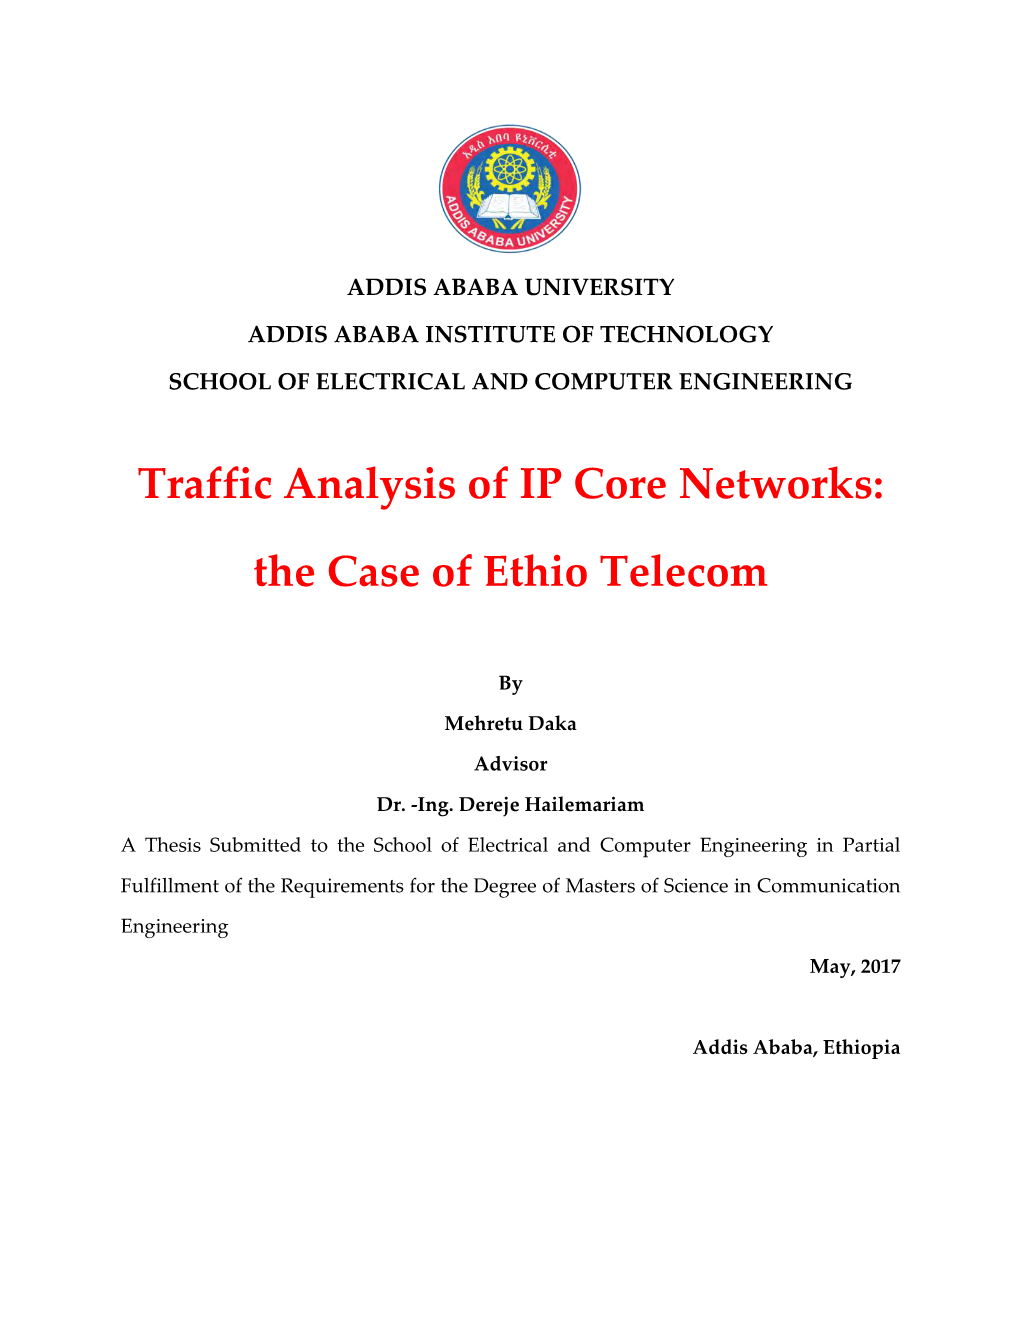 Traffic Analysis of IP Core Networks: the Case of Ethio Telecom